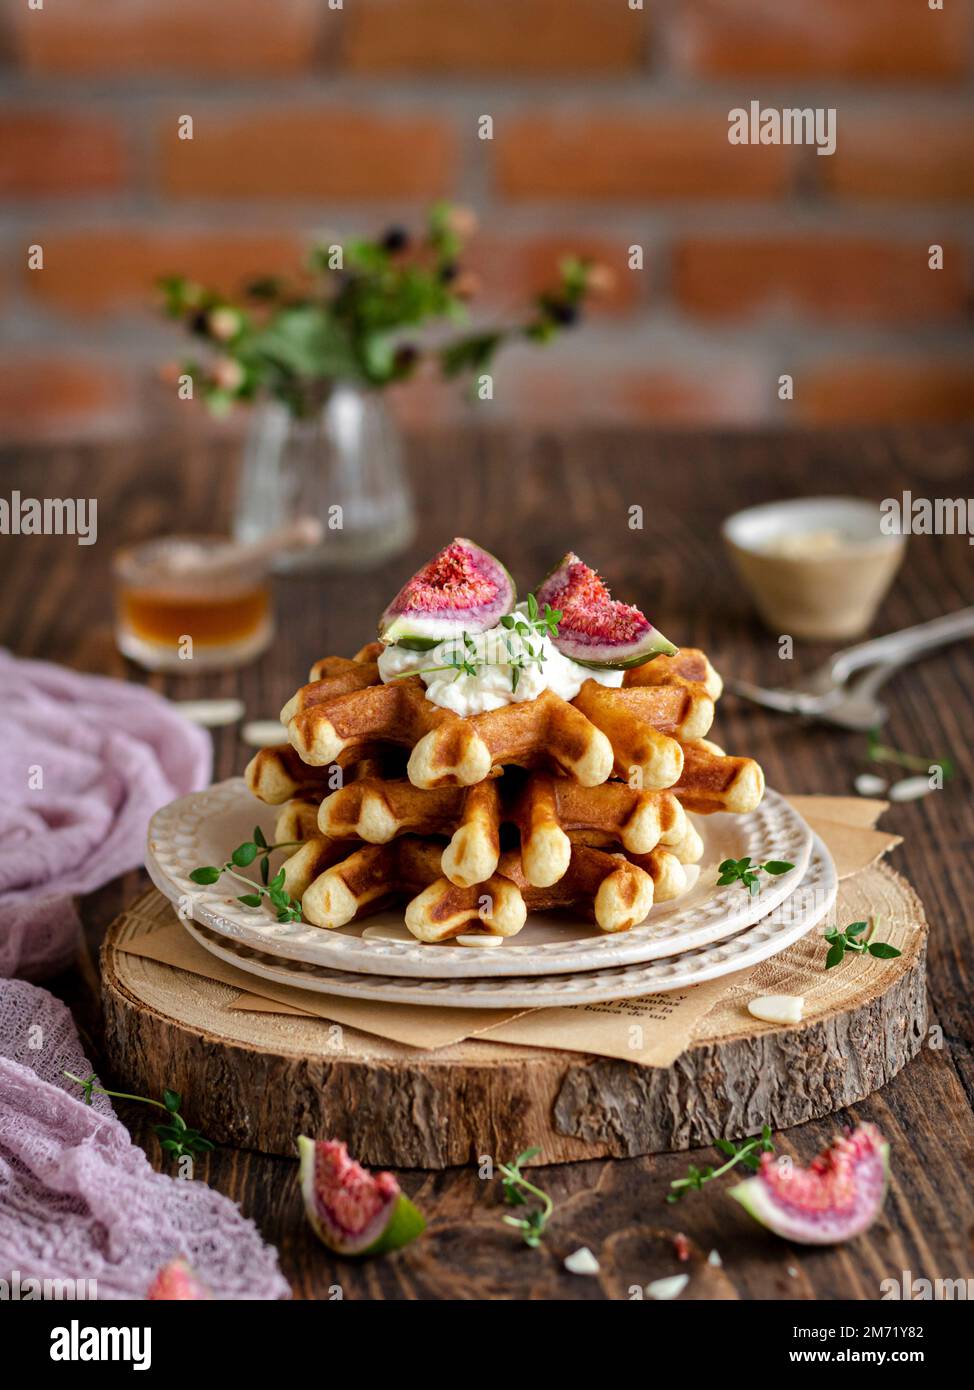 Stack of waffles with figs, cream, thyme and honey on a wooden rustic board. Stock Photo